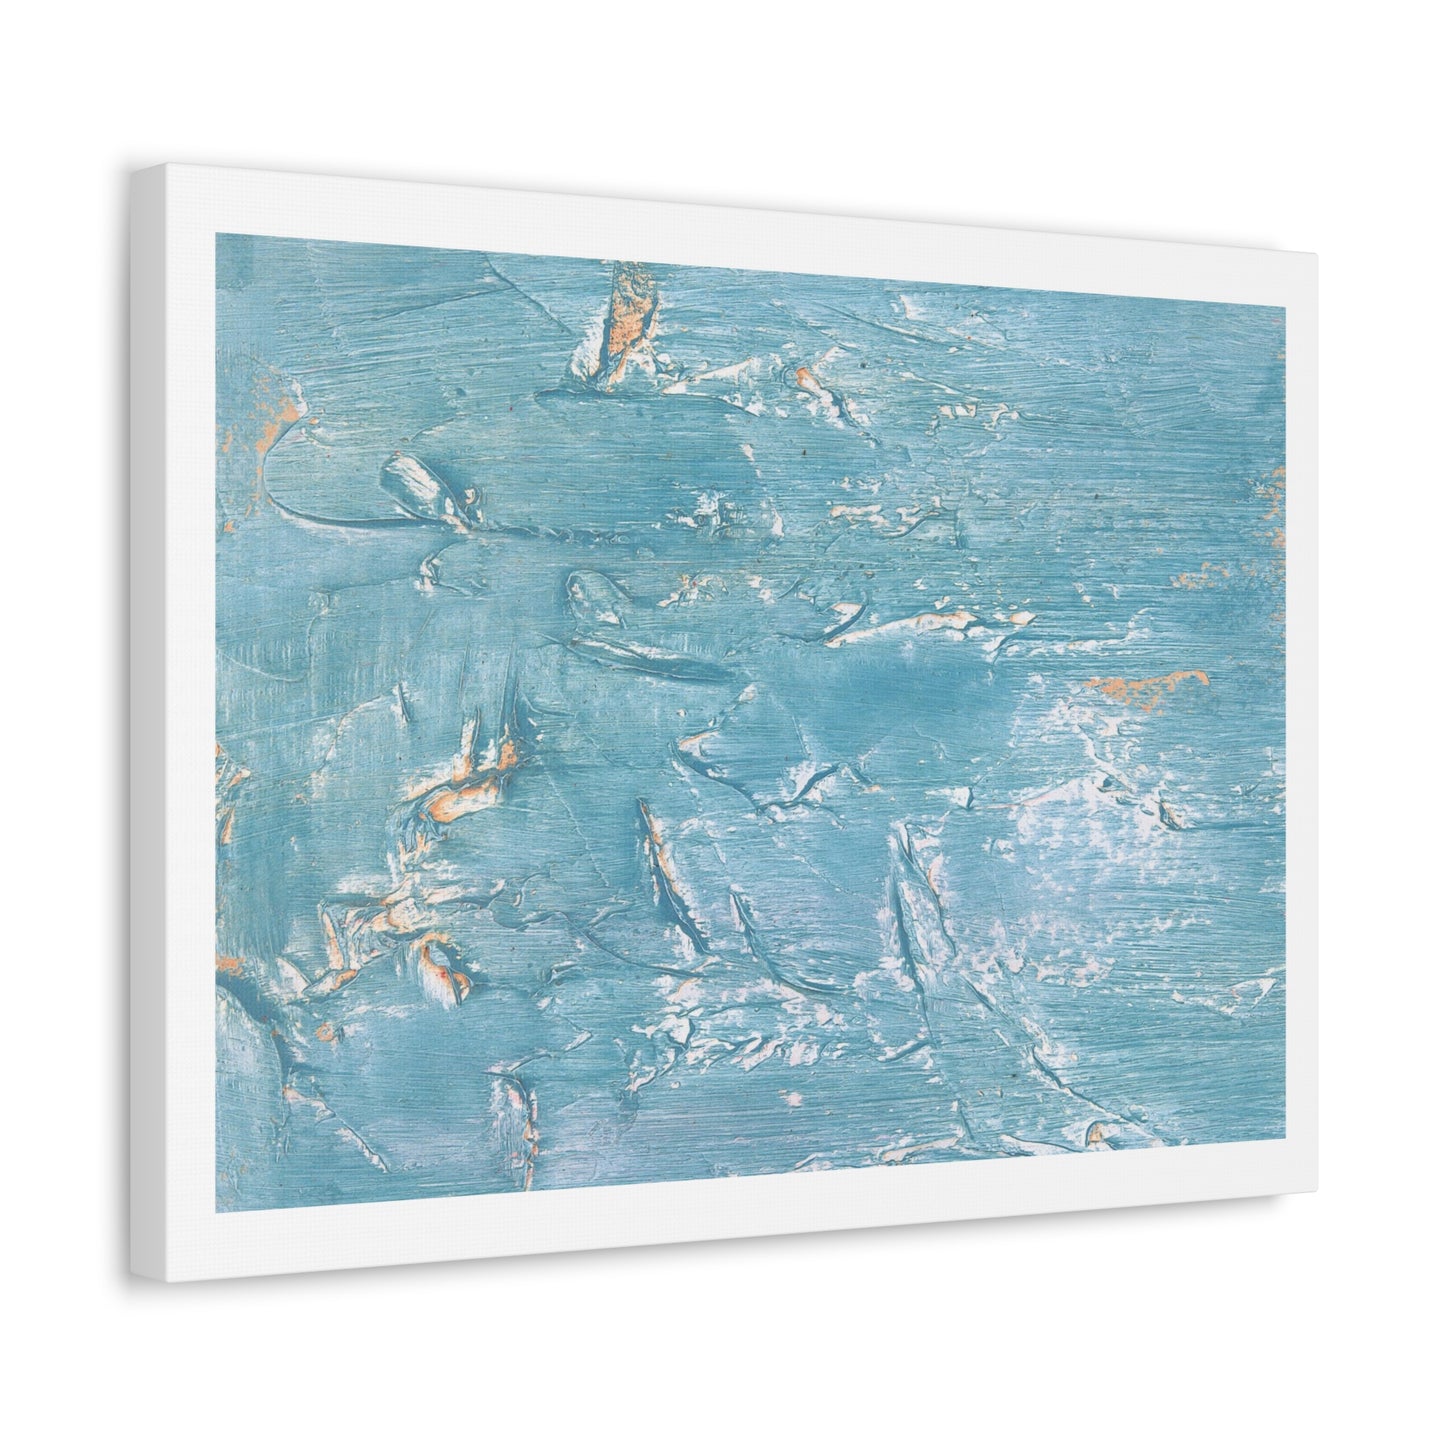 Abstract Blue Waves Watercolour, Art Print on Satin Canvas